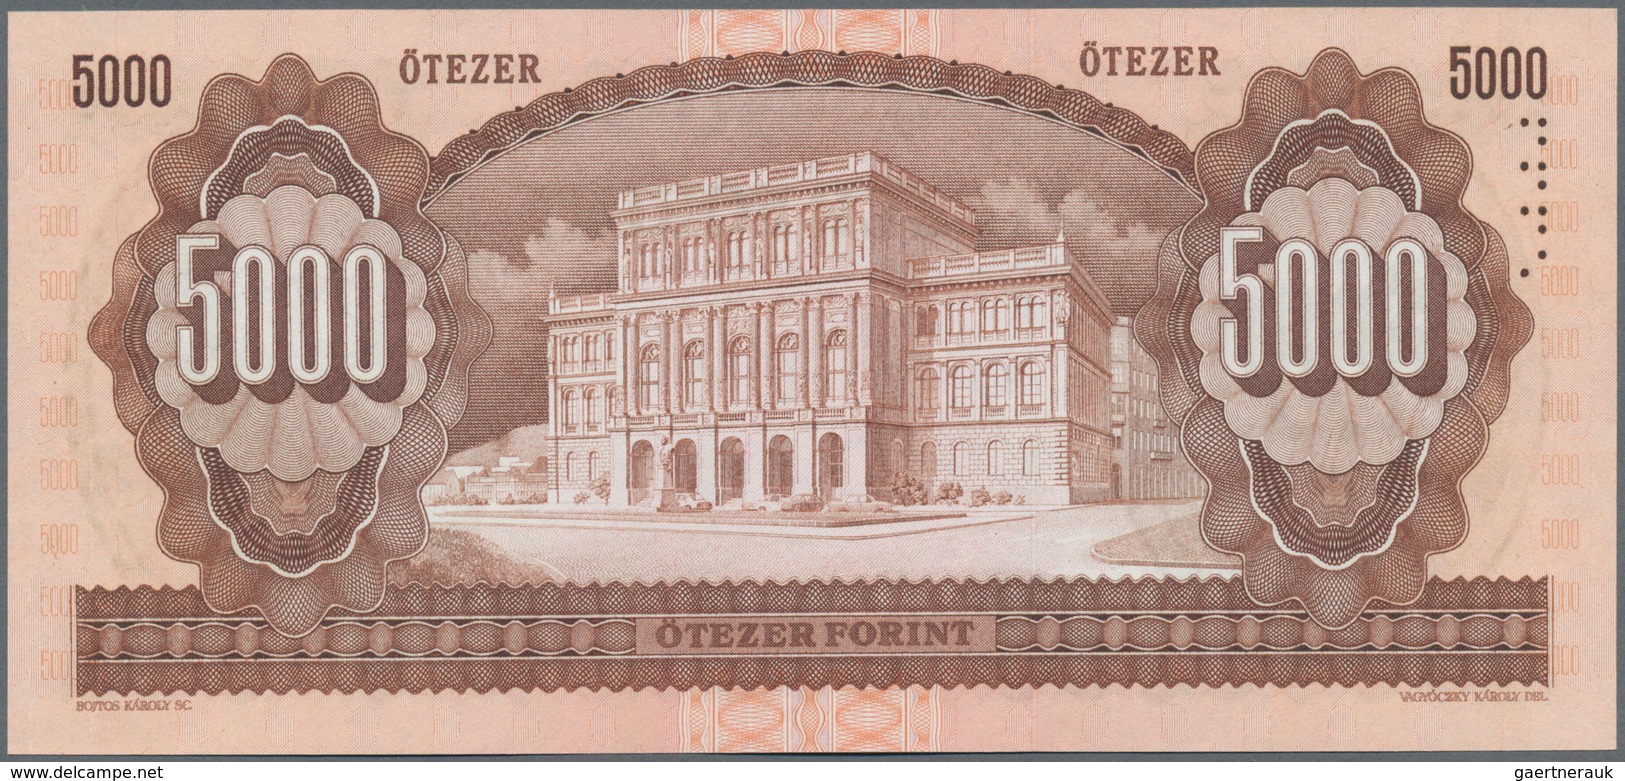 Hungary / Ungarn: Set with 11 banknotes of the 1990 till 1995 series with 100 Forint 1992 (UNC), 199